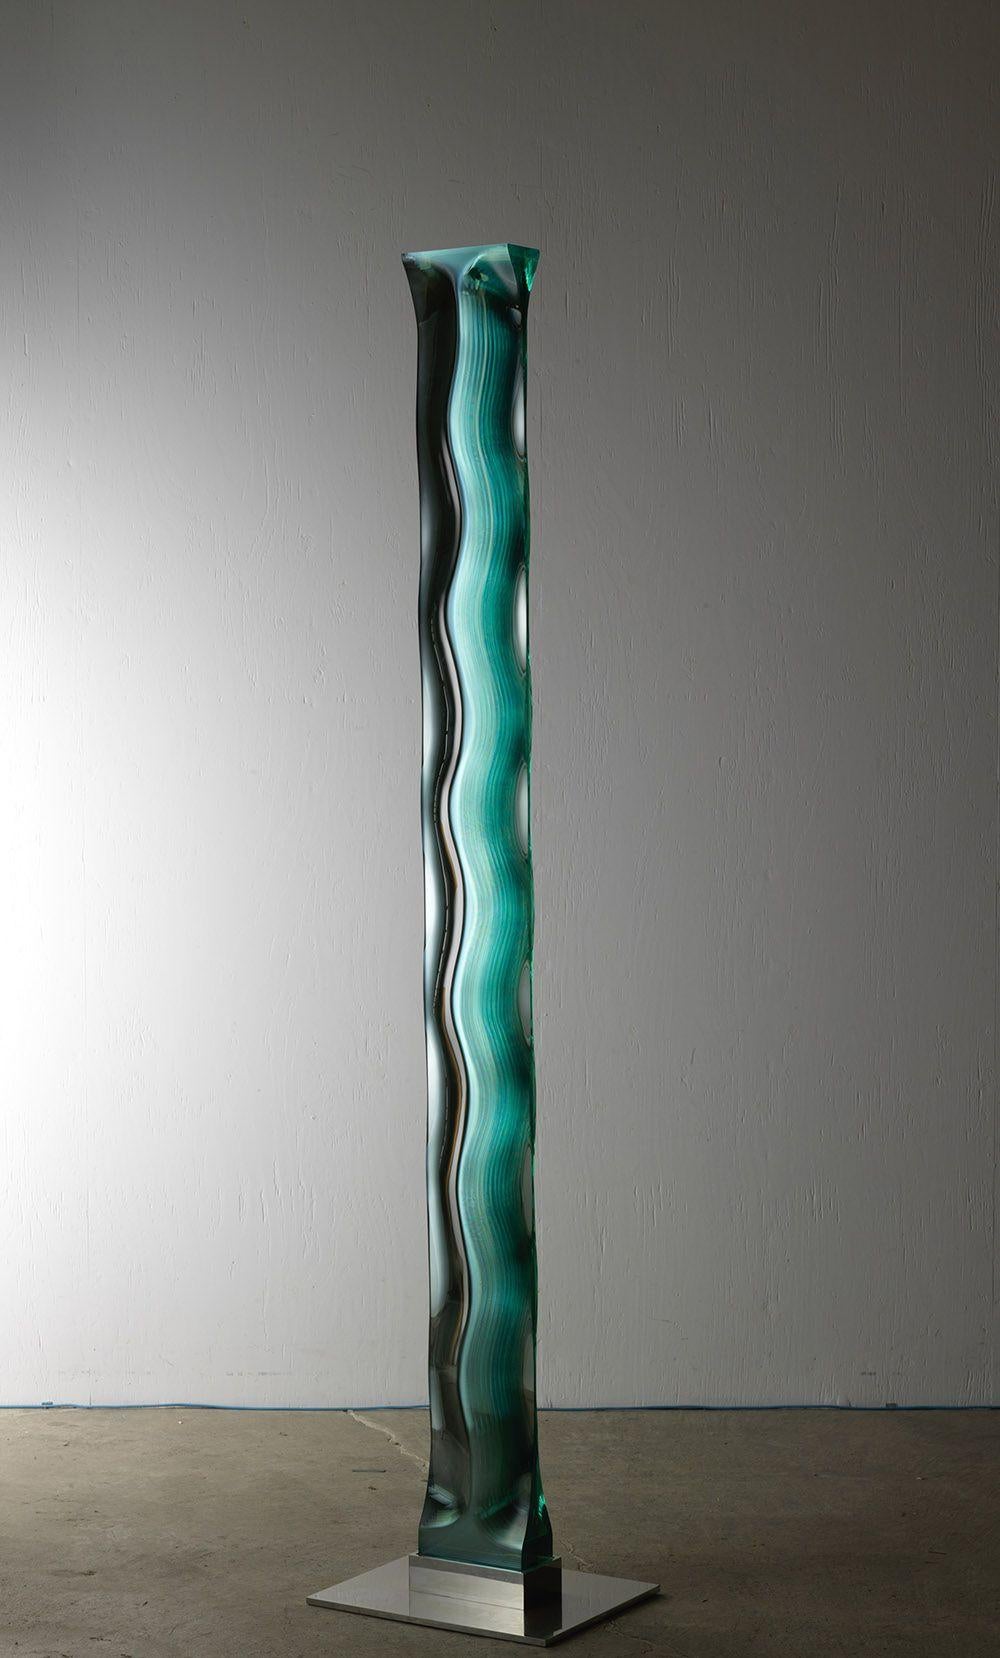 M.080704 by Toshio Iezumi - Glass, Vertical abstract sculpture, column / totem